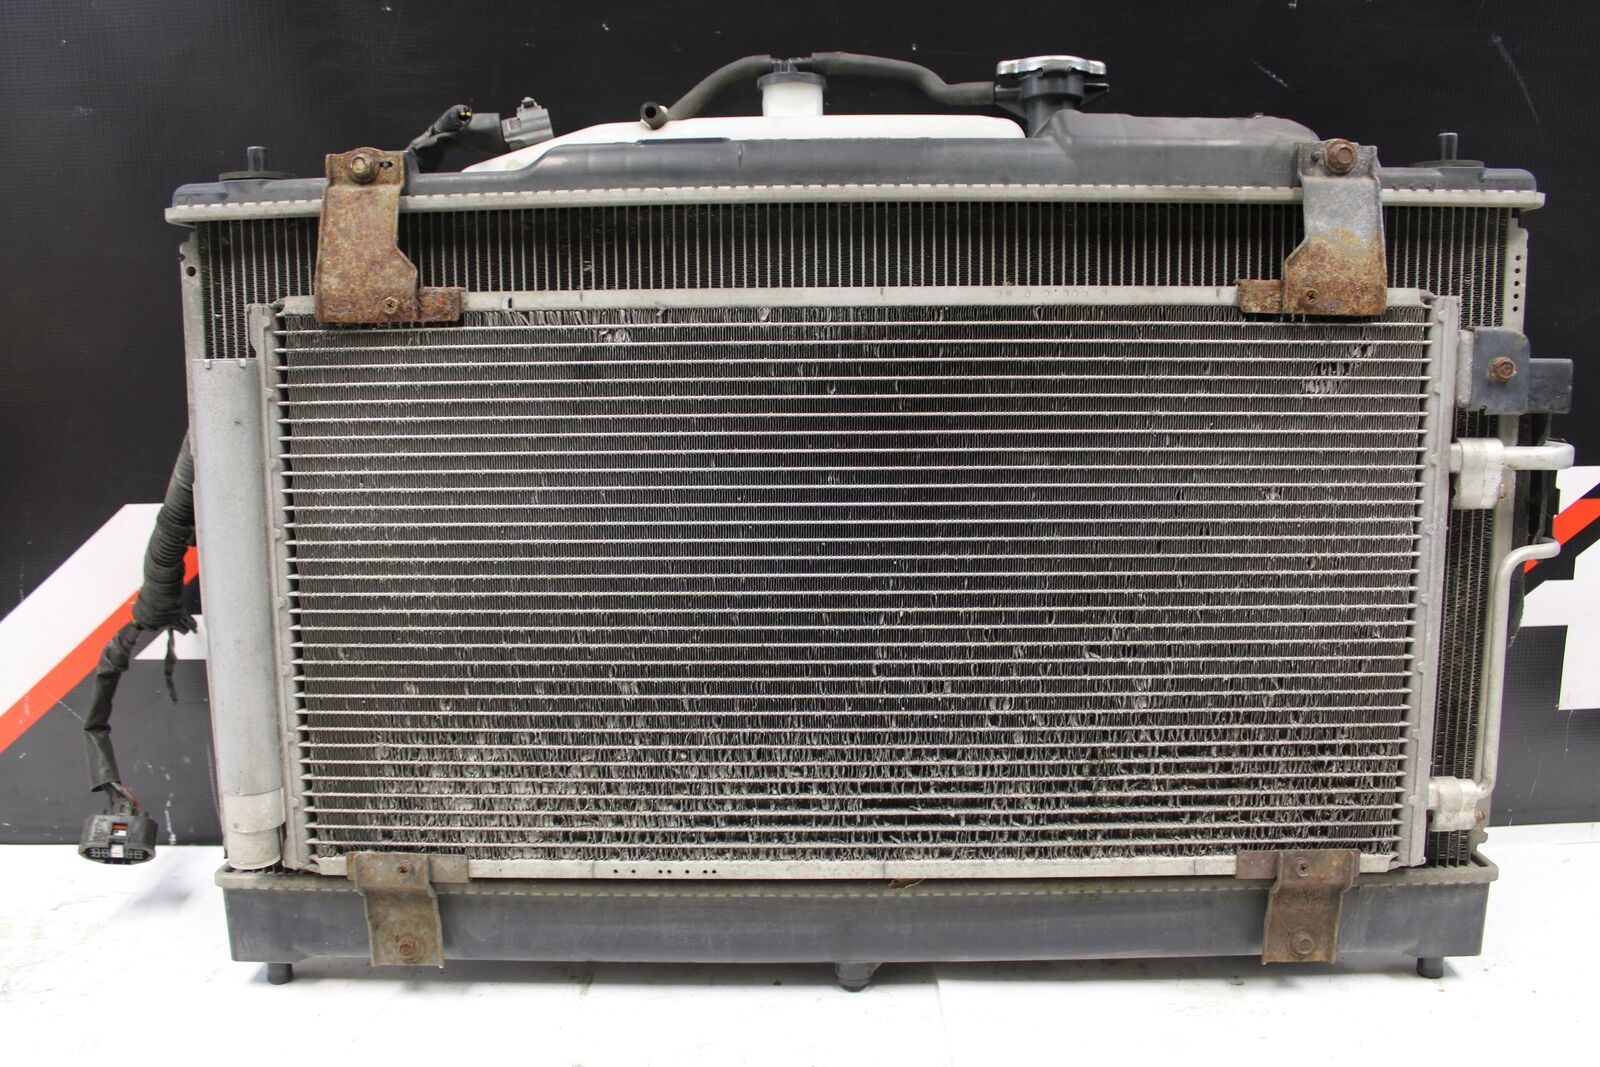 Radiator and fan assembly Mazdaspeed6 Turbo Fits 06-07 MAZDA 6 Speed6 OEM MS6